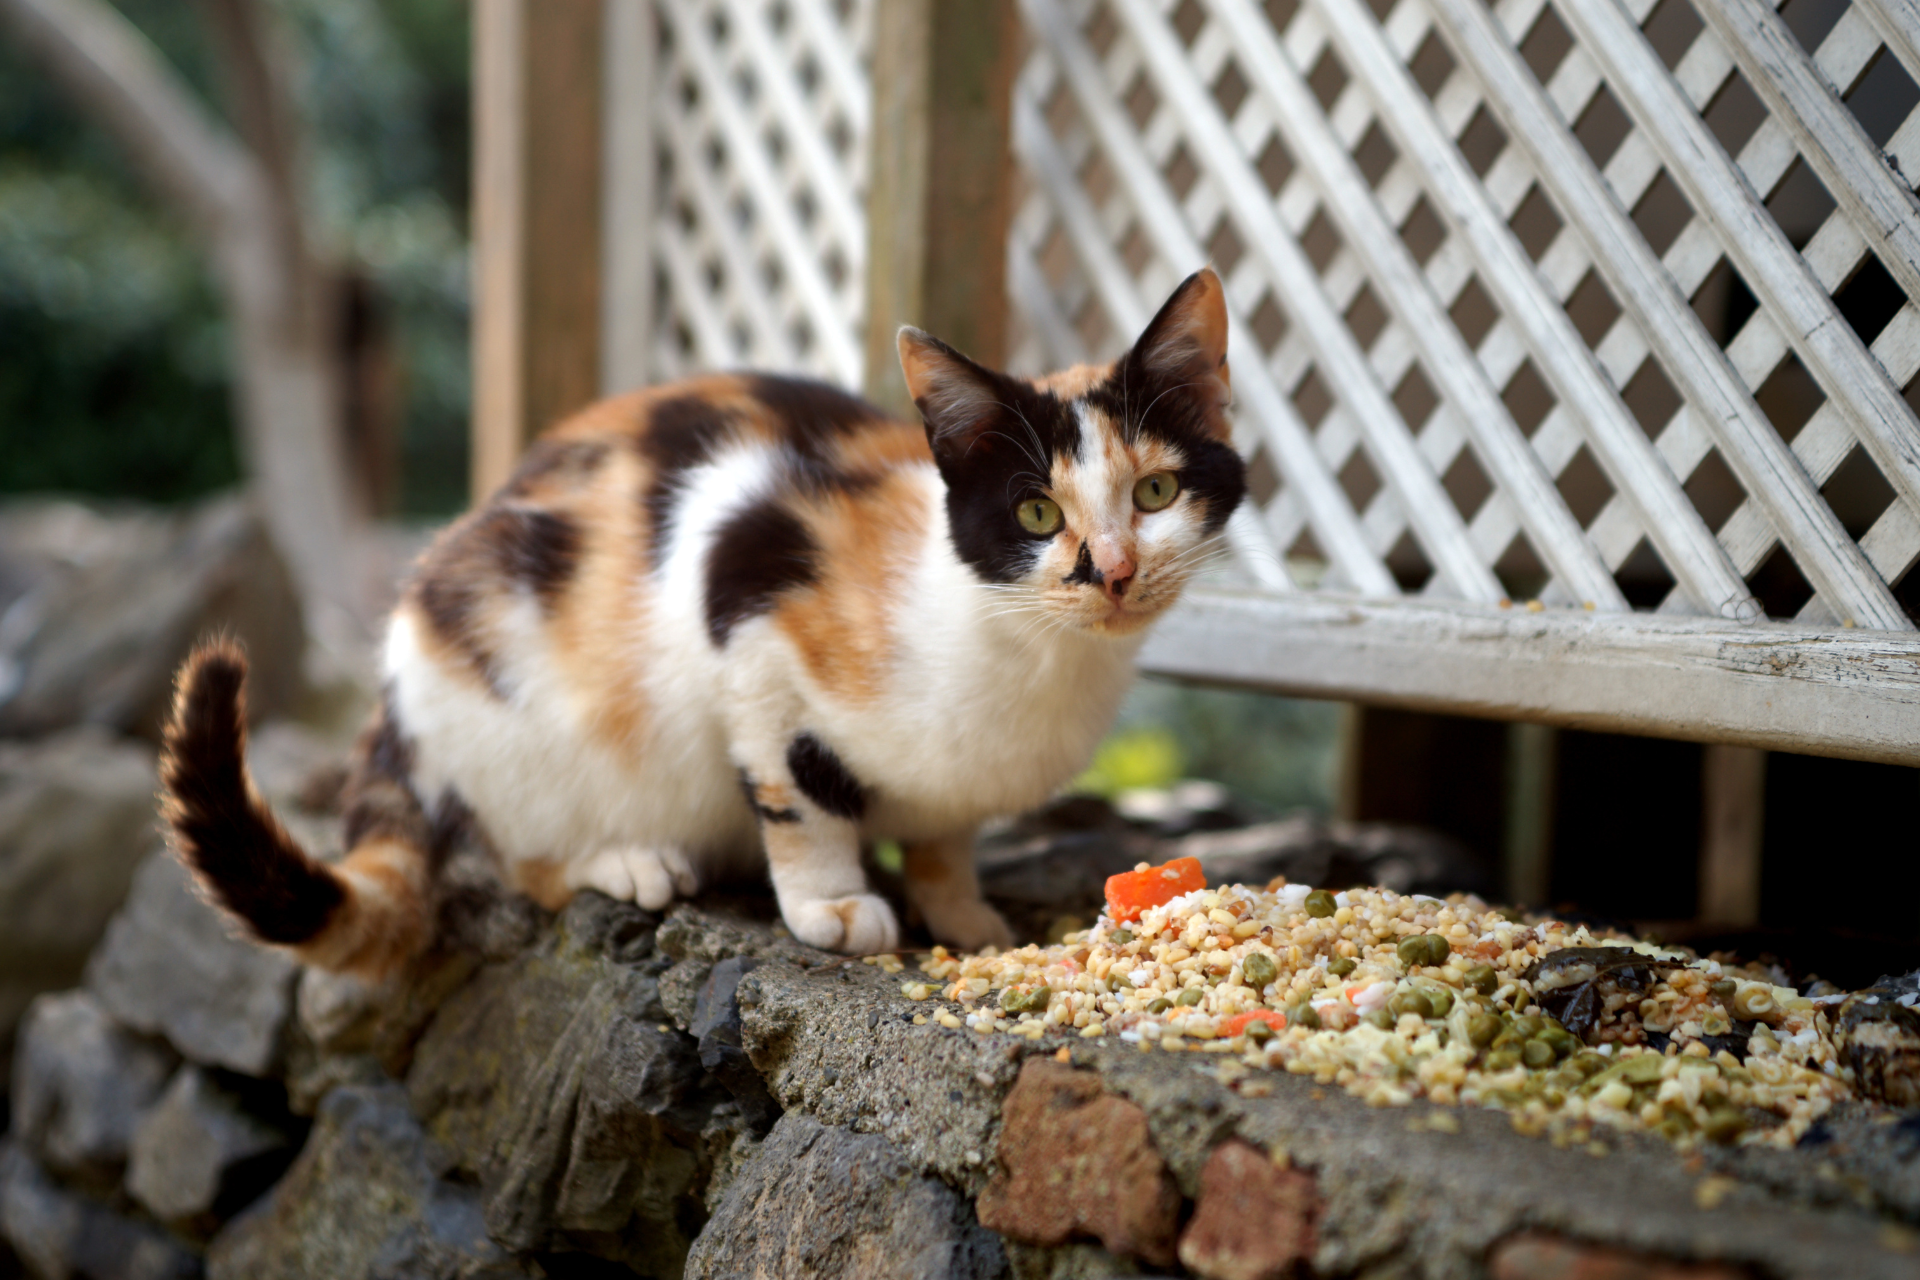 Stray calico cat sitting on fenceline looking at the camera